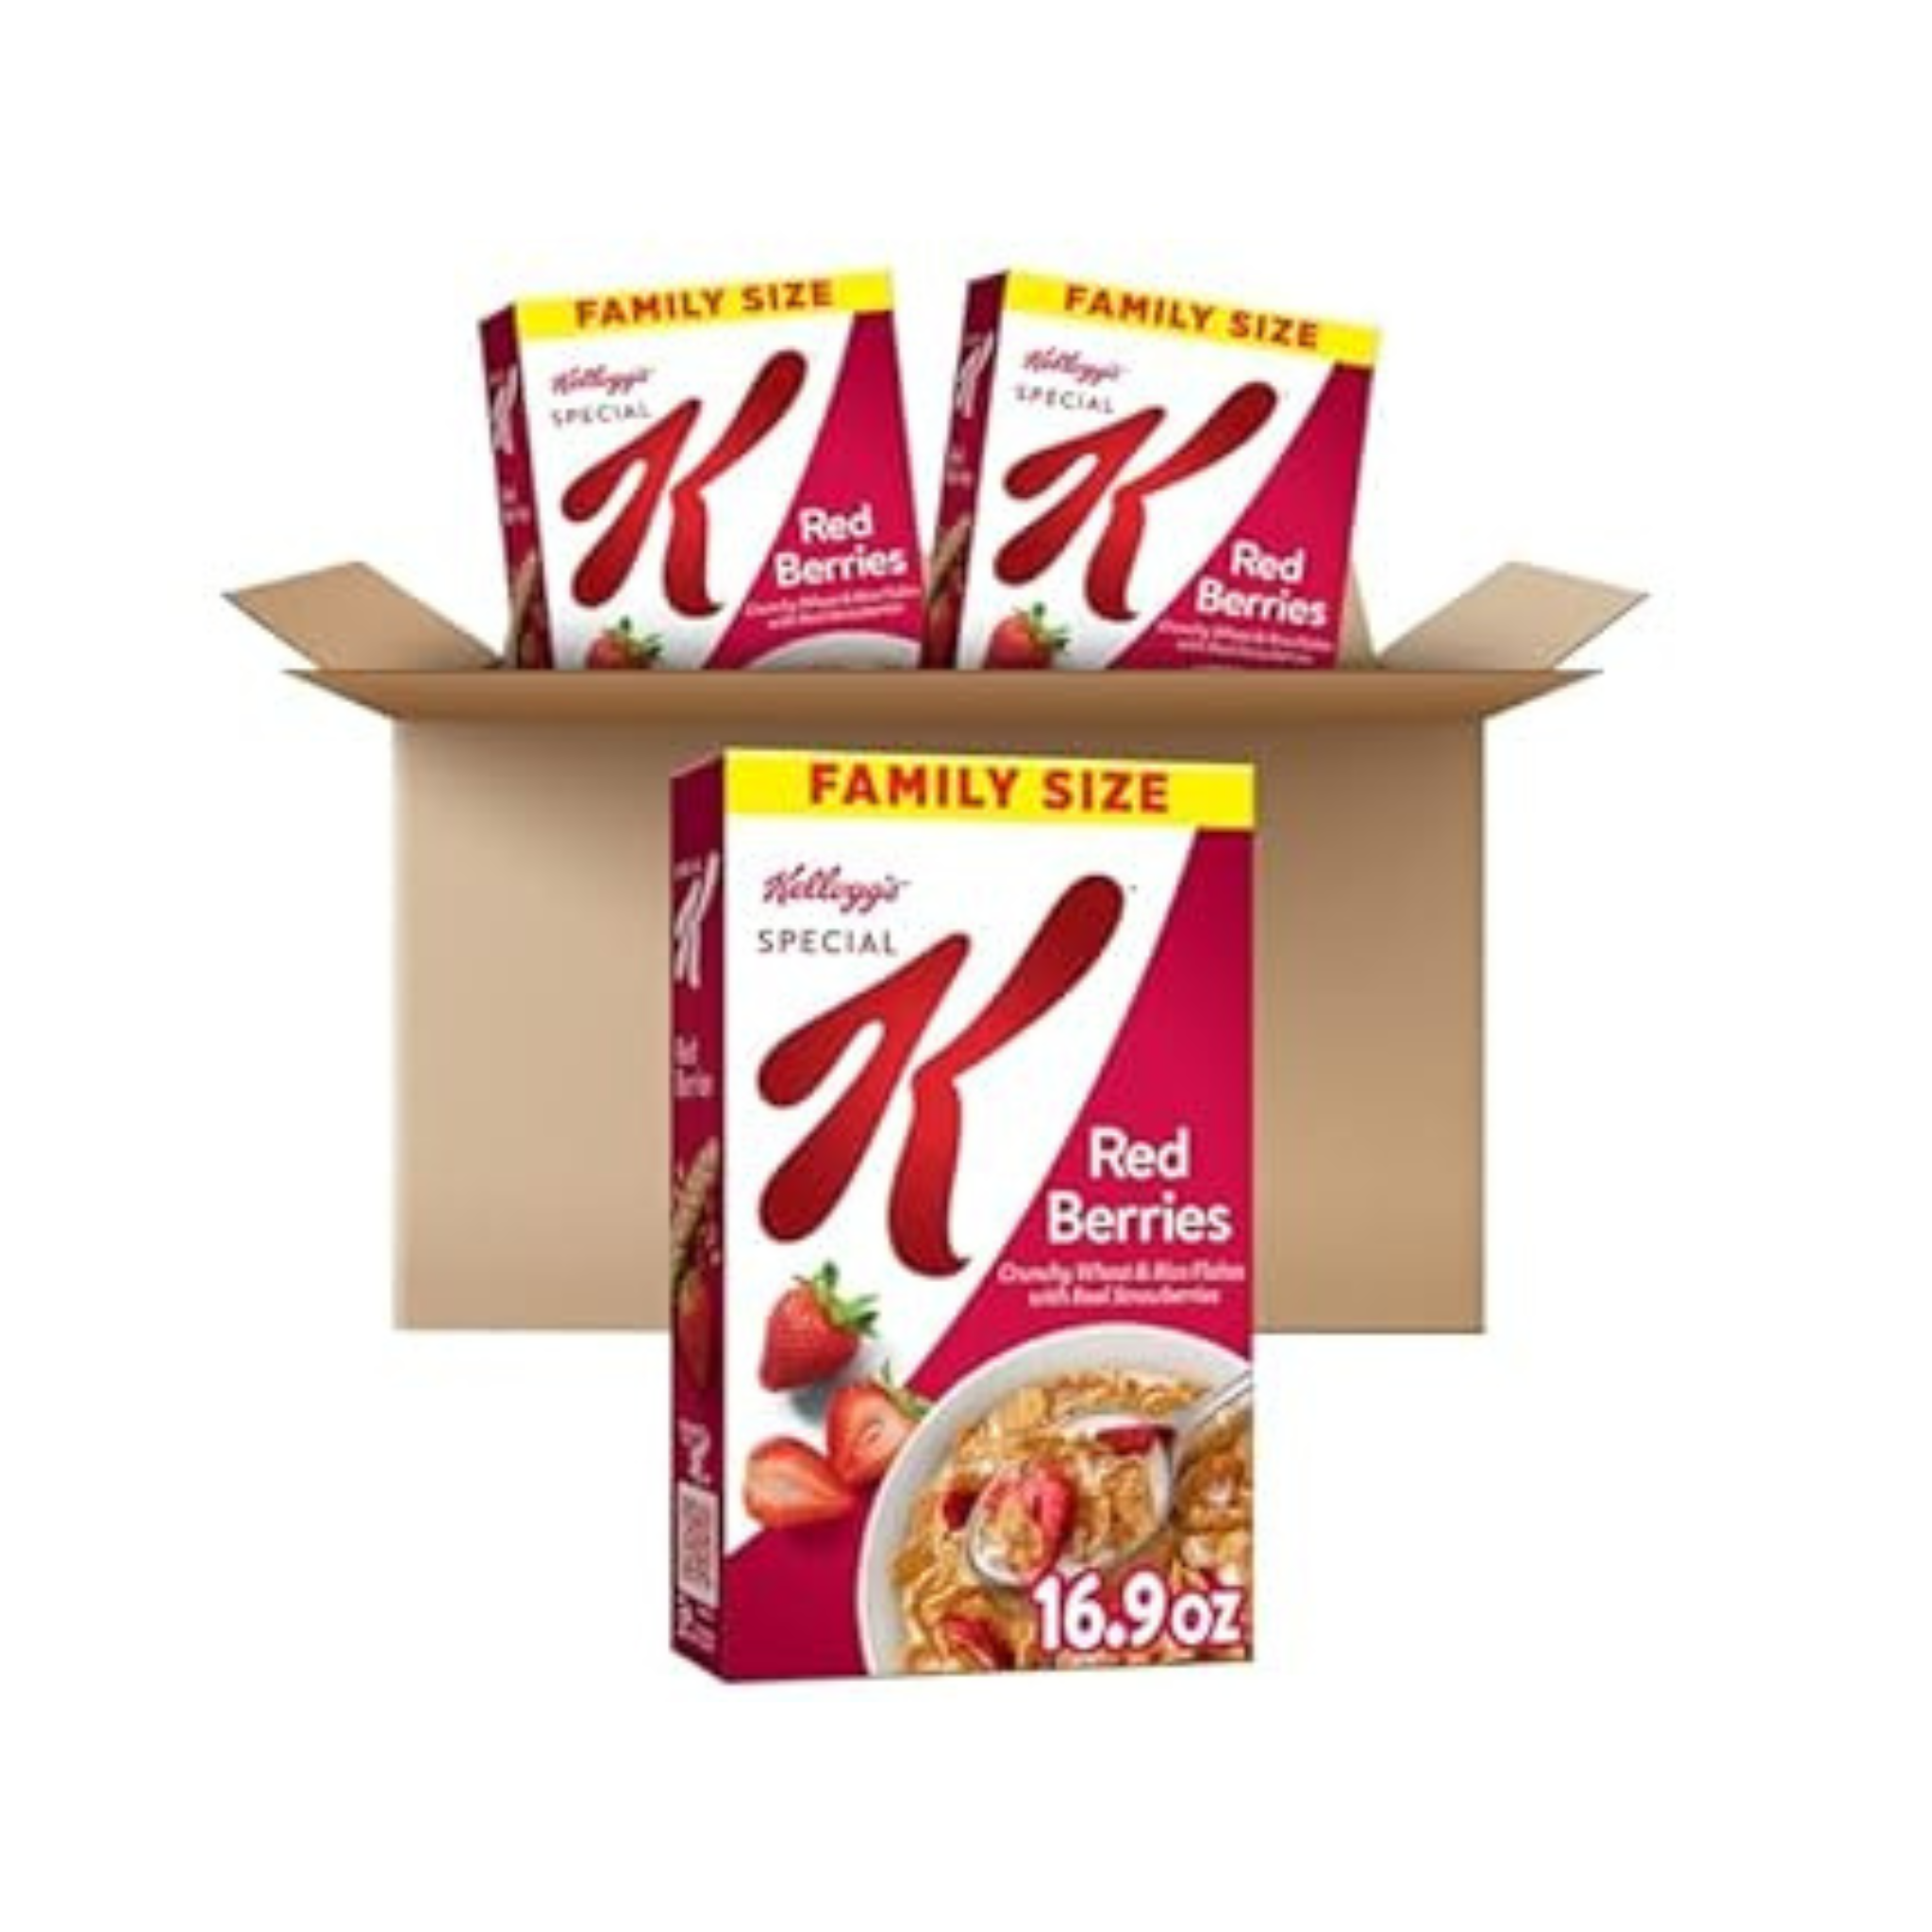 Kellogg’s Special K Breakfast Cereal, Made with Real Strawberries, Family Size Boxes (3 Boxes)